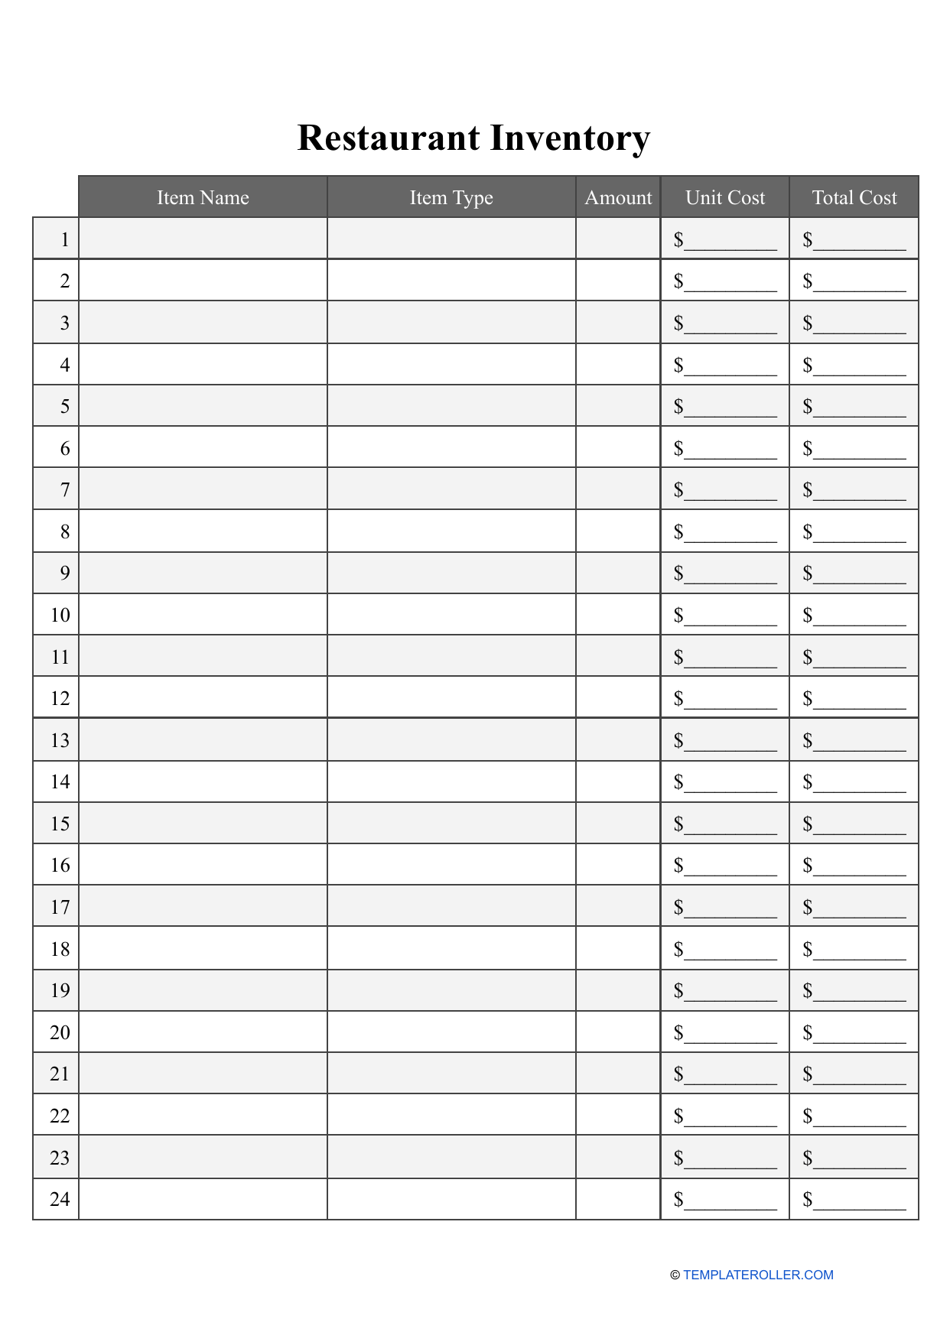 Restaurant Inventory Template, Page 1